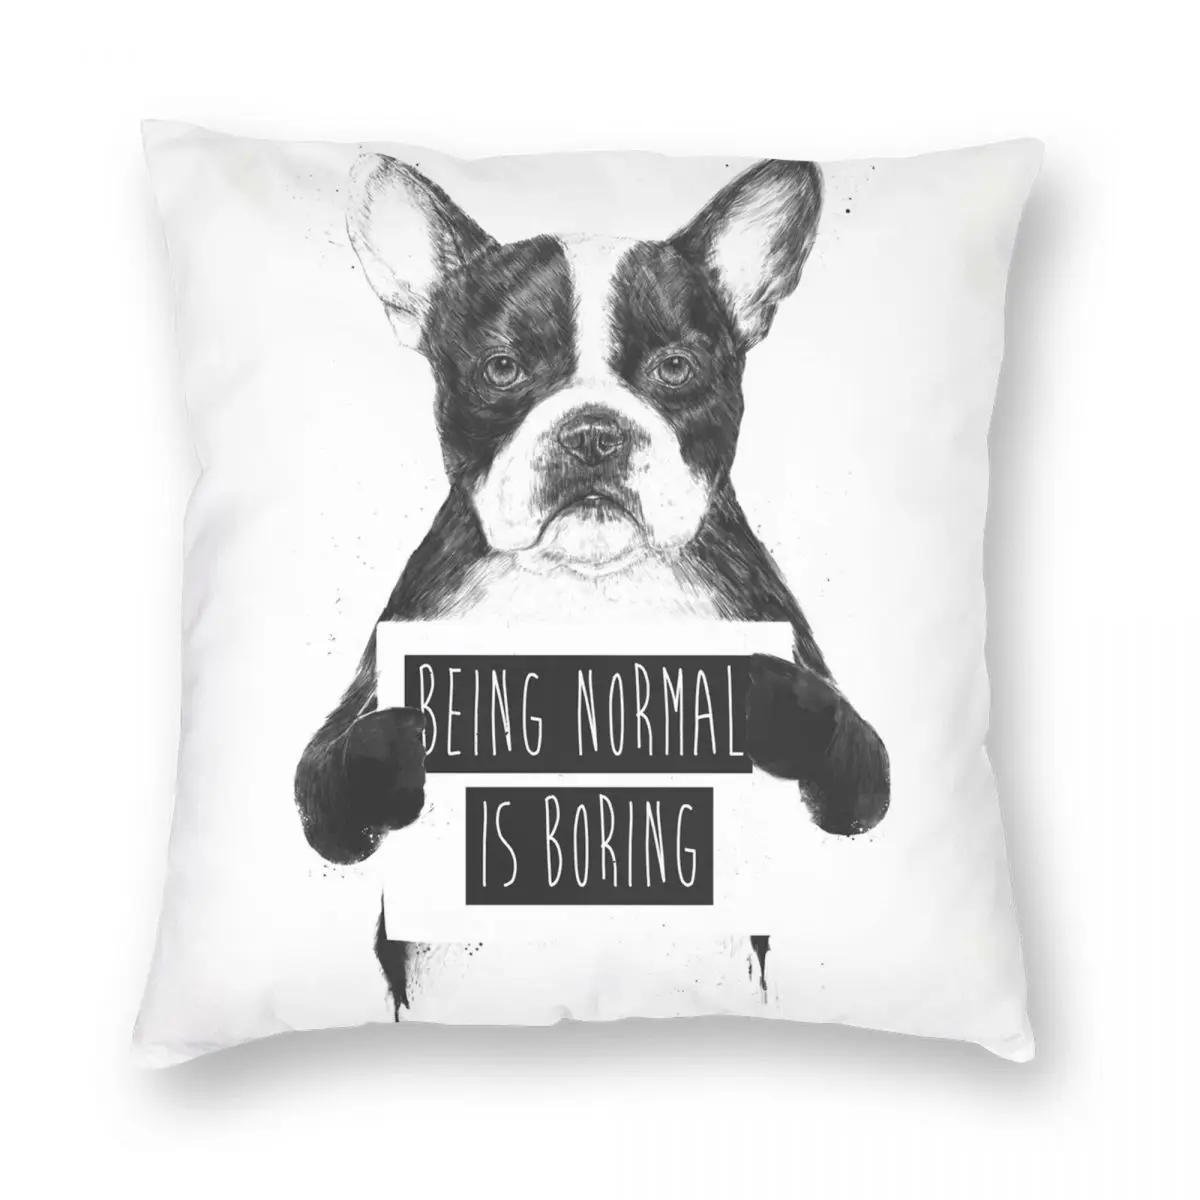 

Being Normal Is Boring Square Pillowcase Polyester Linen Velvet Printed Zip Decor Home Cushion Cover